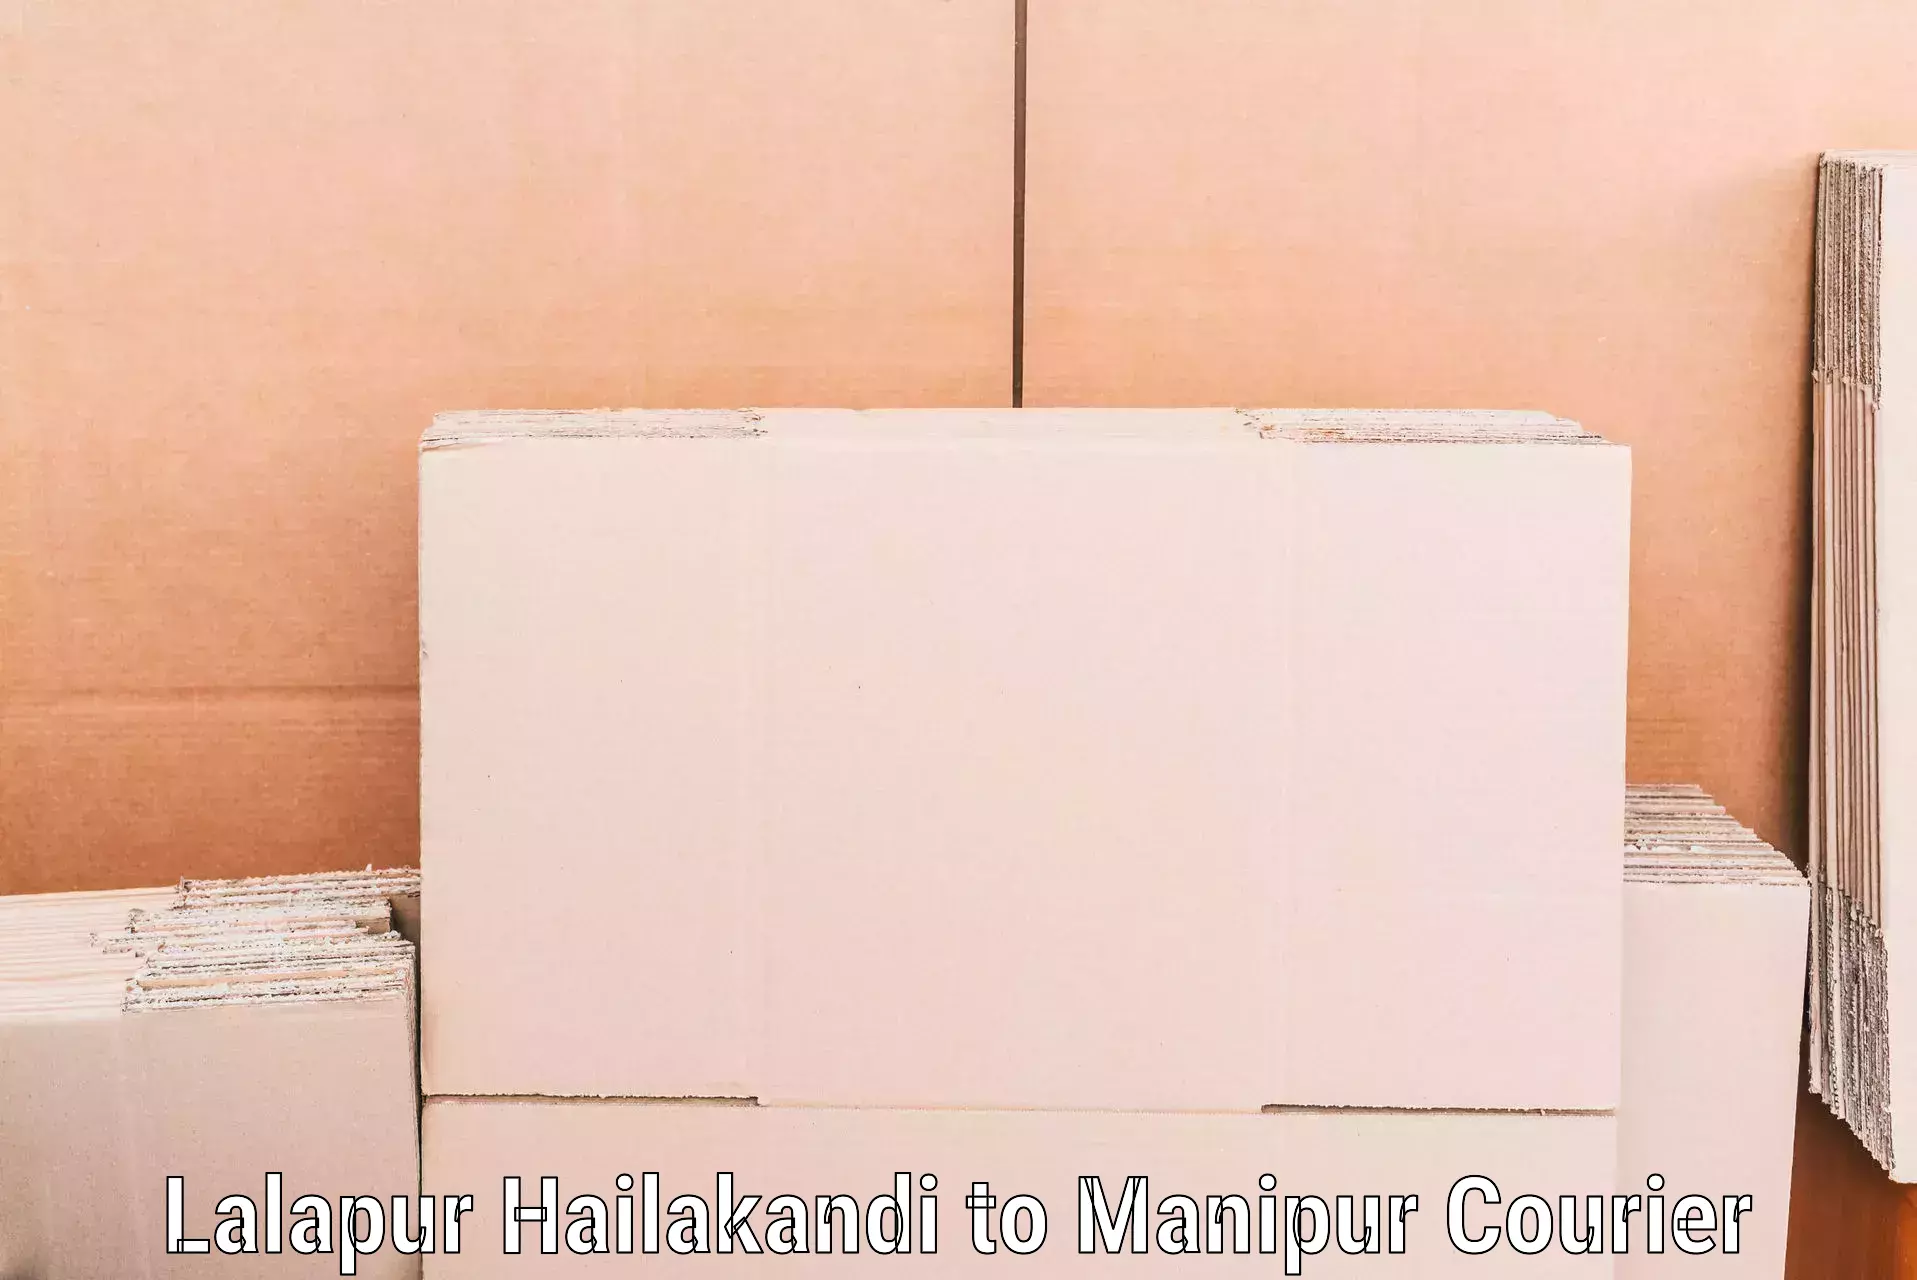 Moving and storage services Lalapur Hailakandi to Chandel